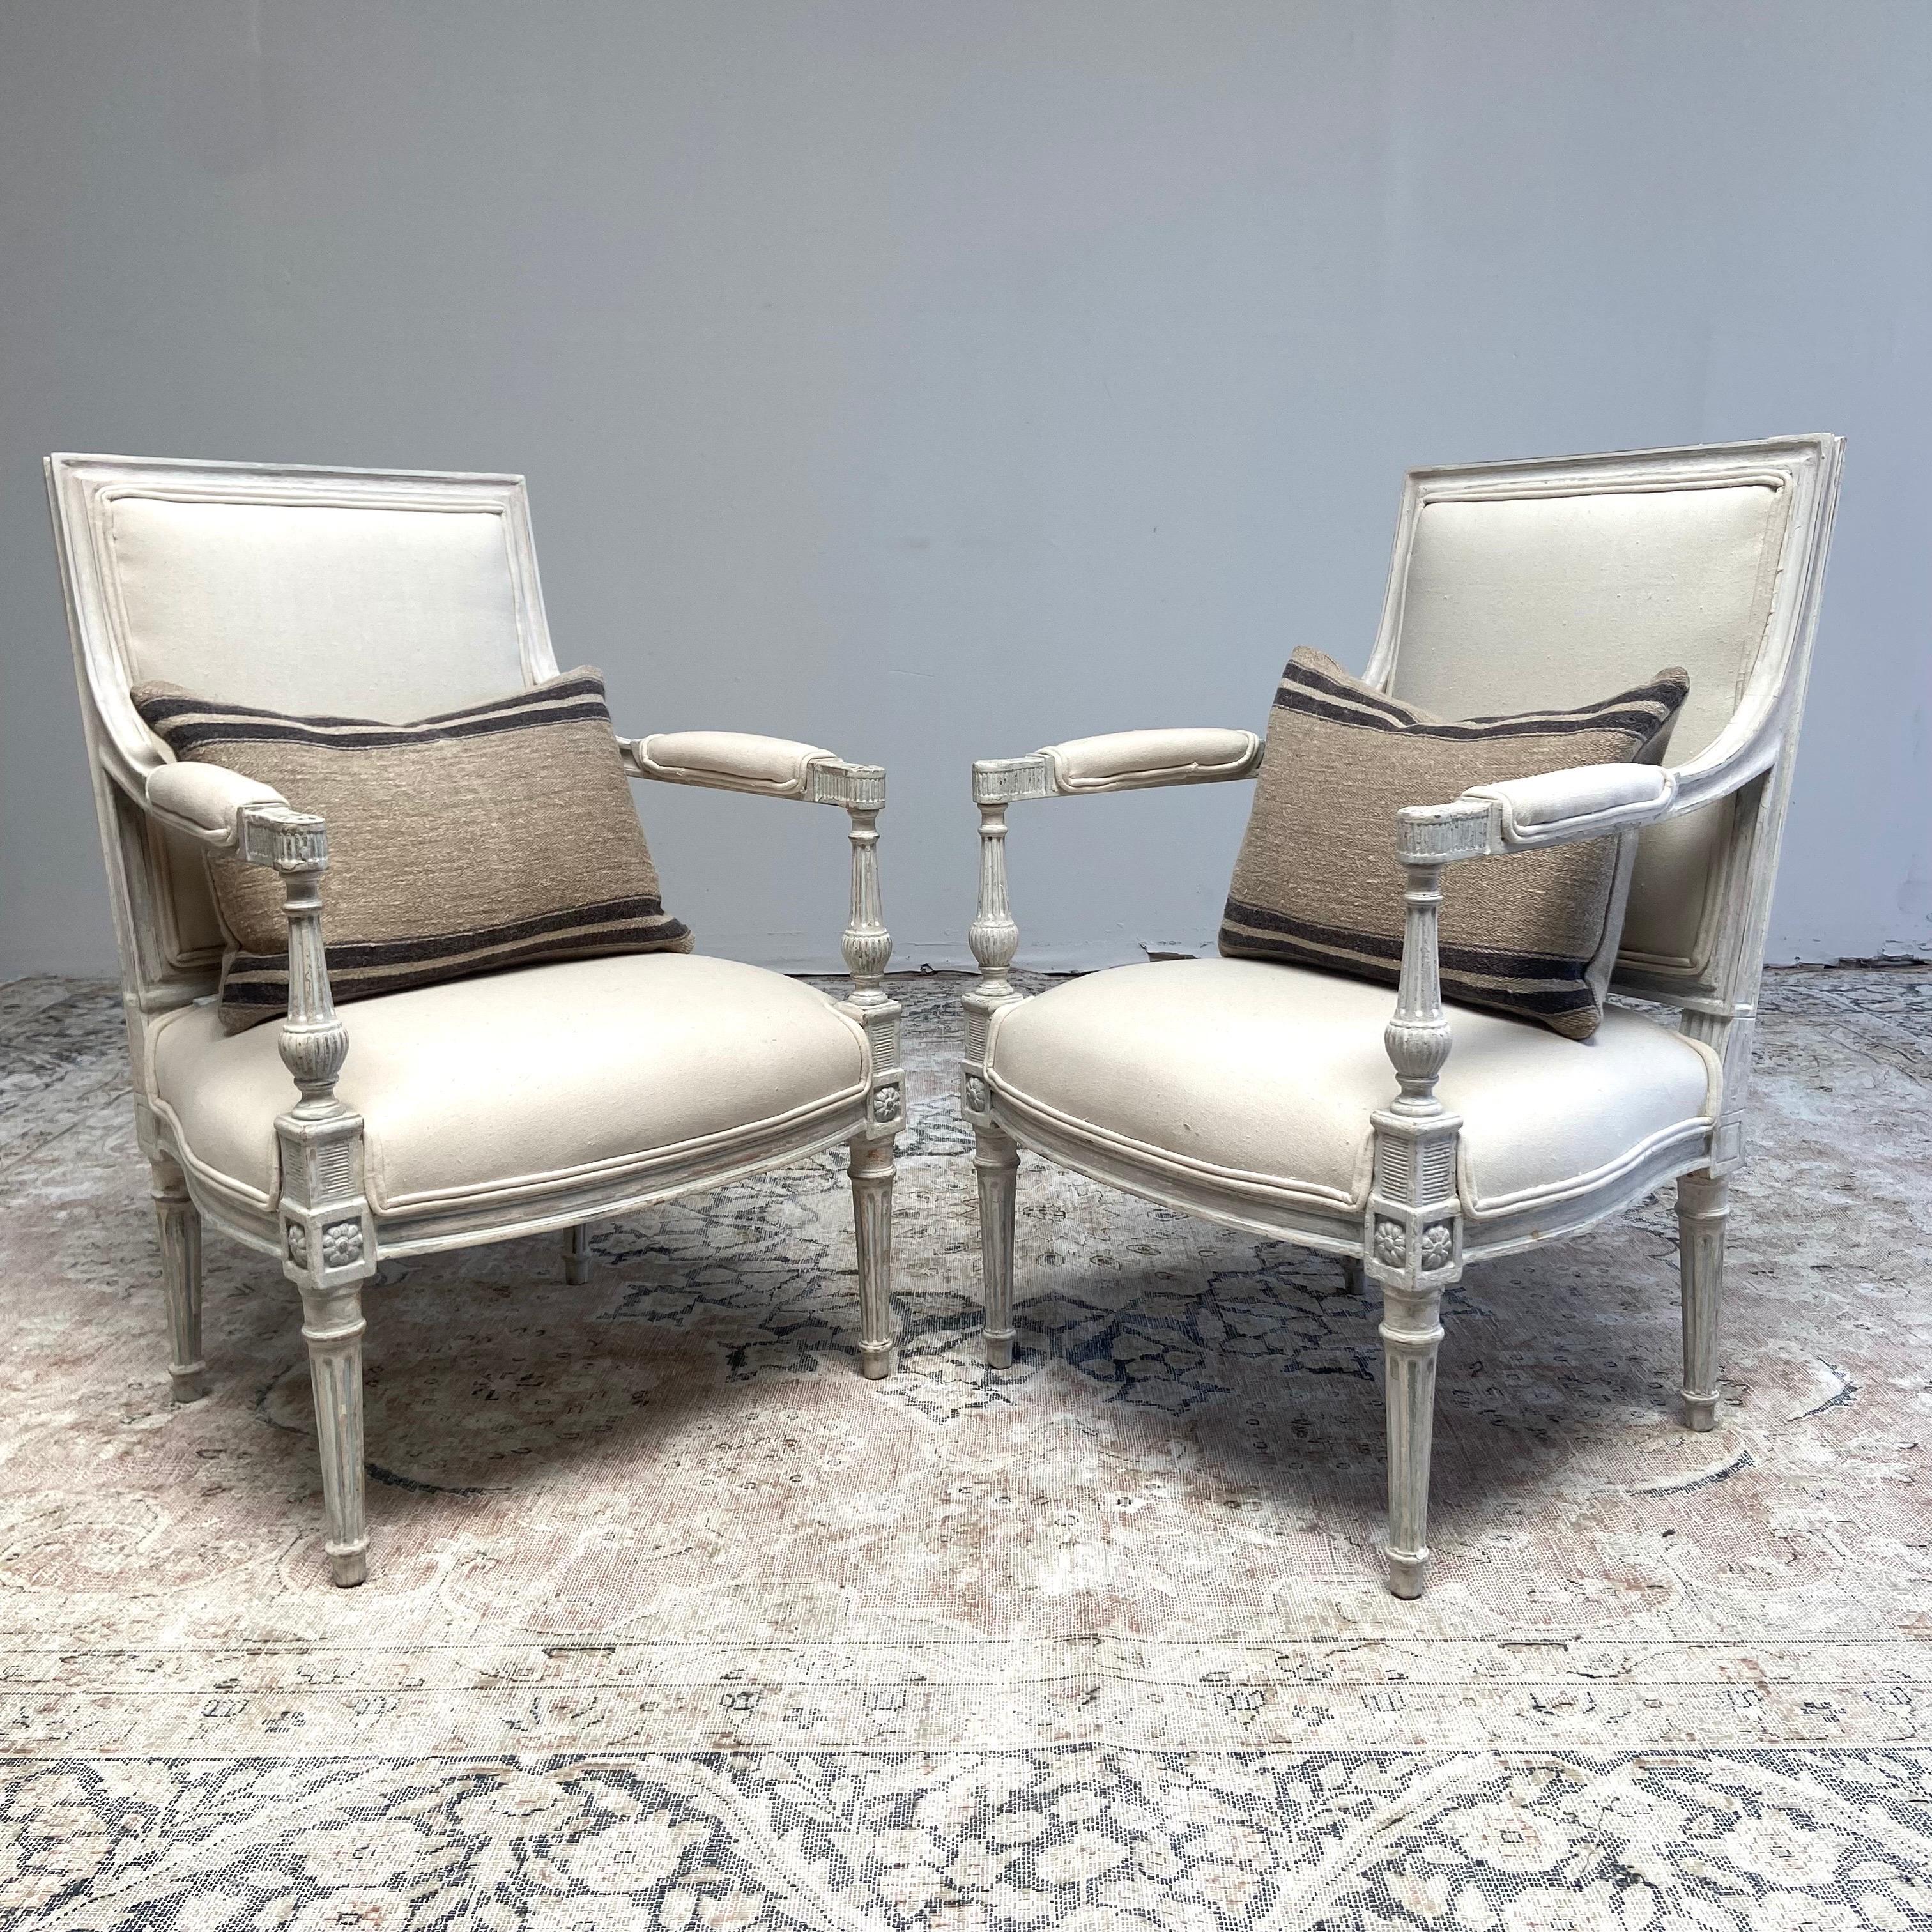 Pair of Vintage Neoclassical Painted and Upholstered Arm Chairs
Painted in a soft oyster white with subtle antique distressed edges, and finished in an antique patina.

Pair arm chairs 24”w x 24”d x 35”h
SH:16”. SD:19”. AH:24”.